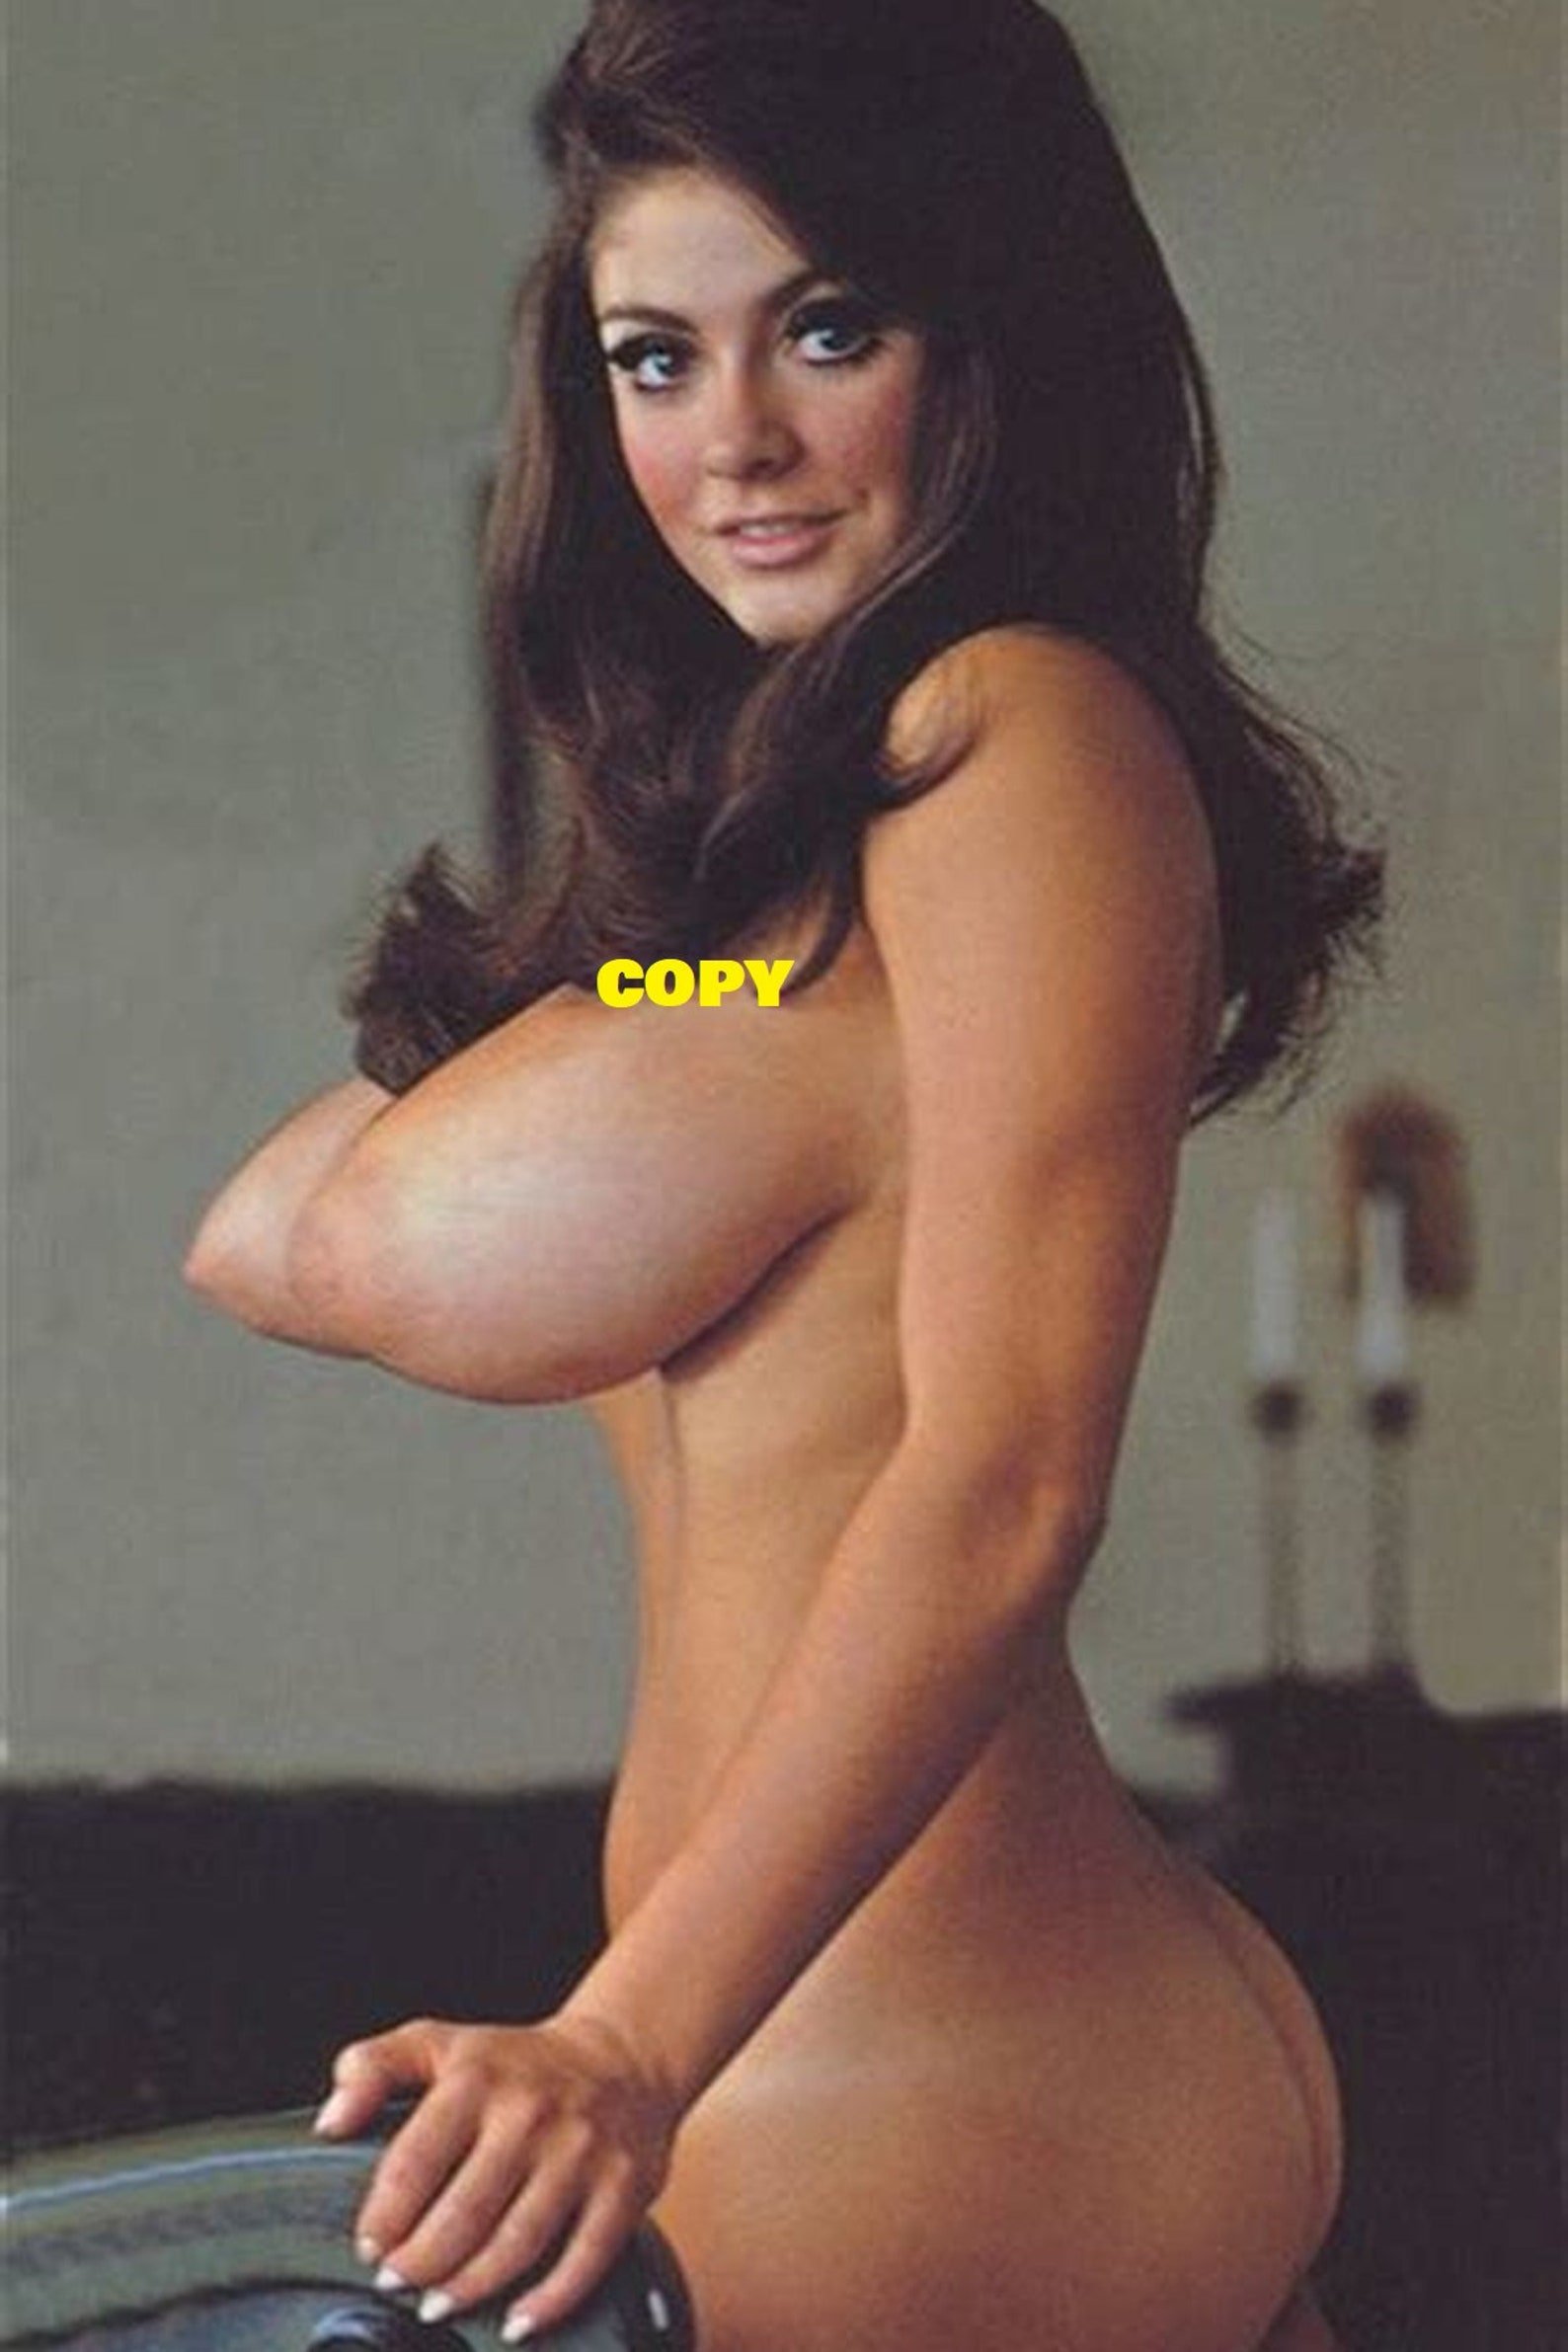 christian arts recommends cynthia myers nude photos pic